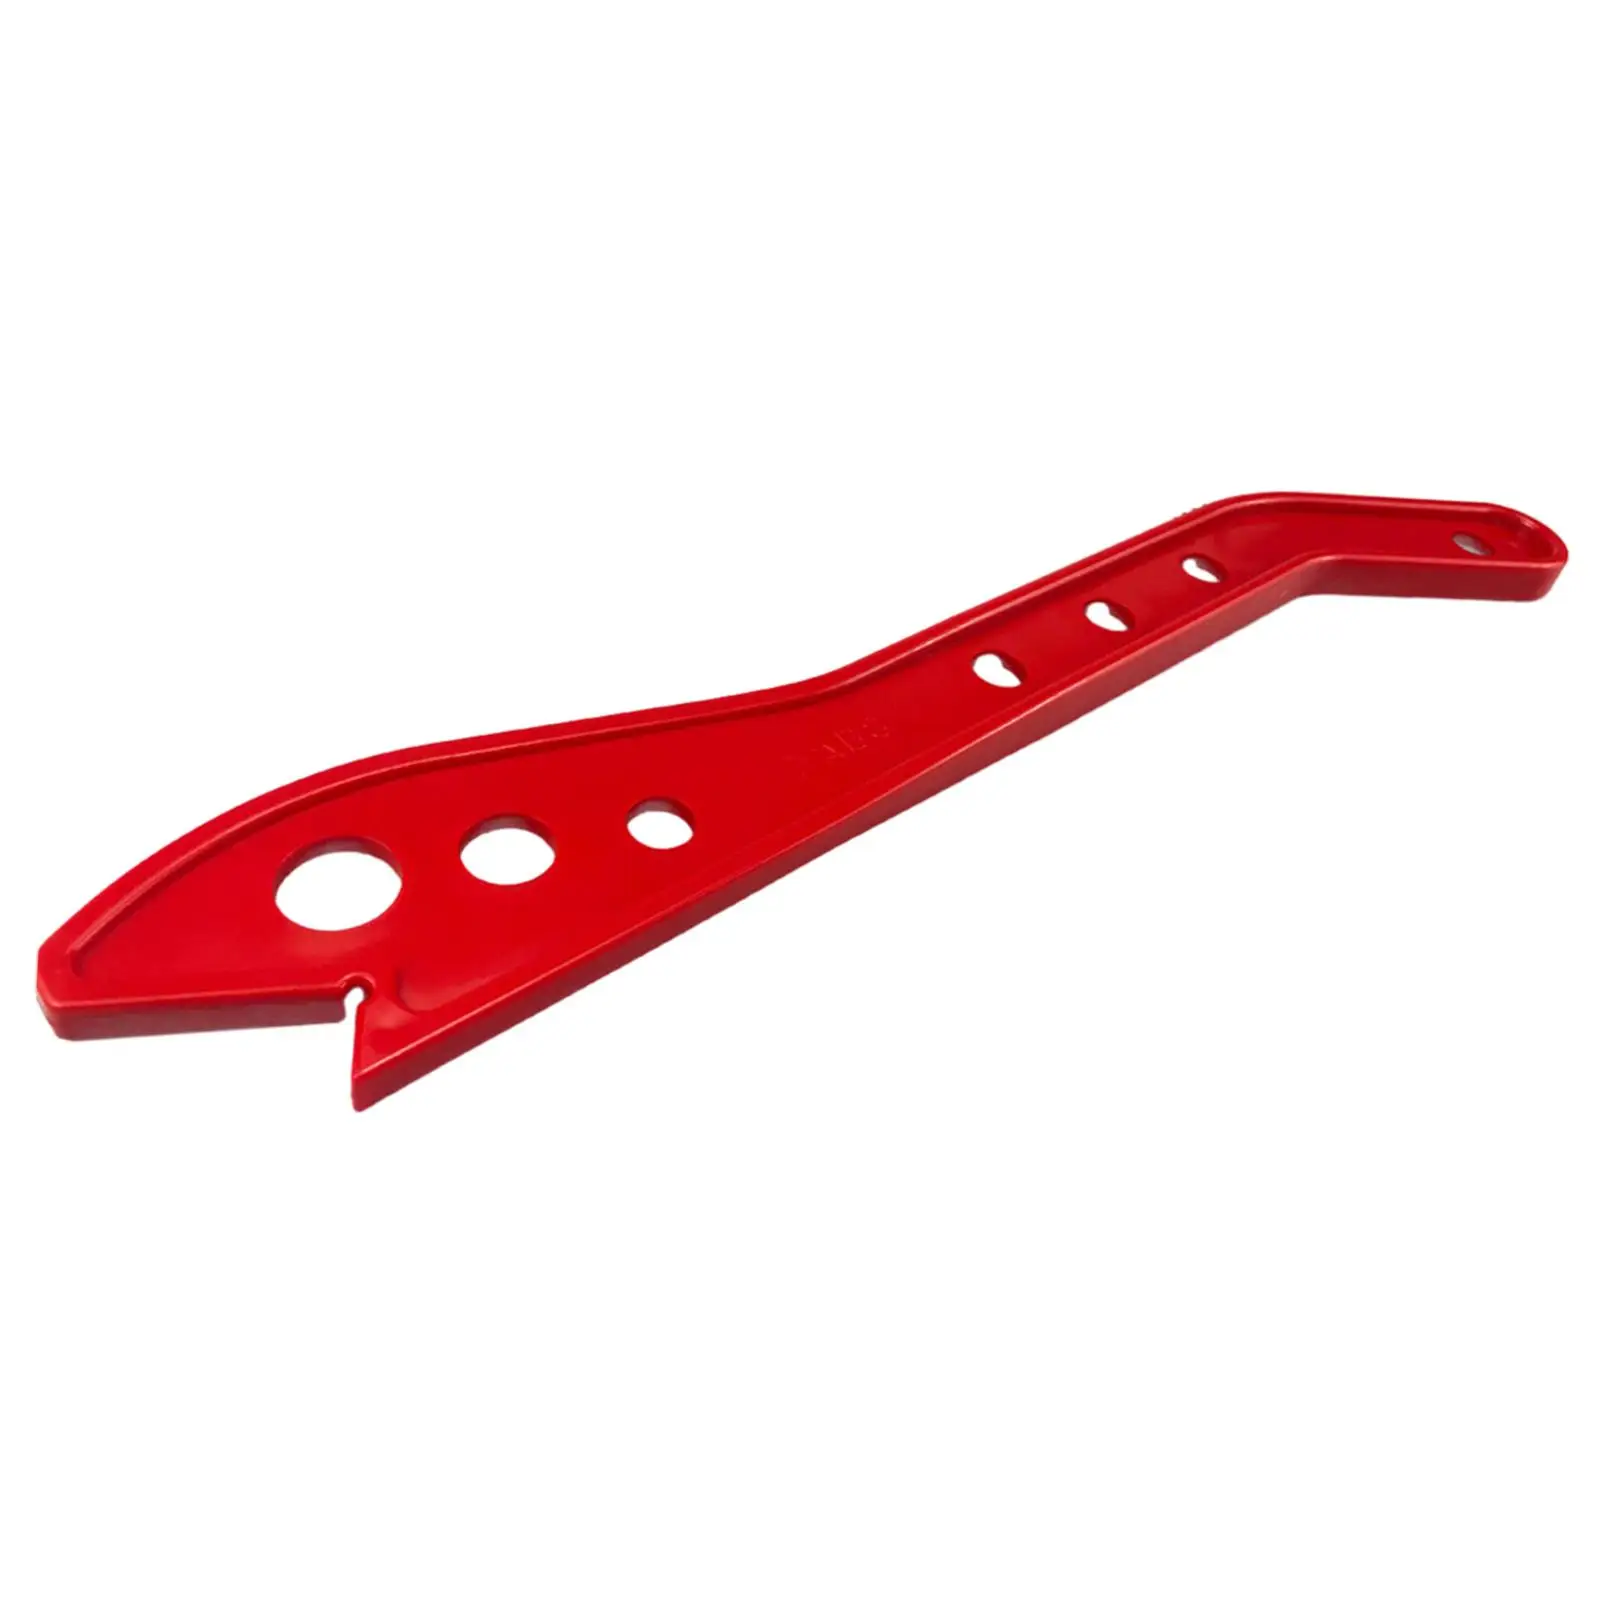 Woodworking Saw Pusher Push Rod Comfortable Grip for Professional and Amateur Woodworkers Durable Accessory Red Lightweight